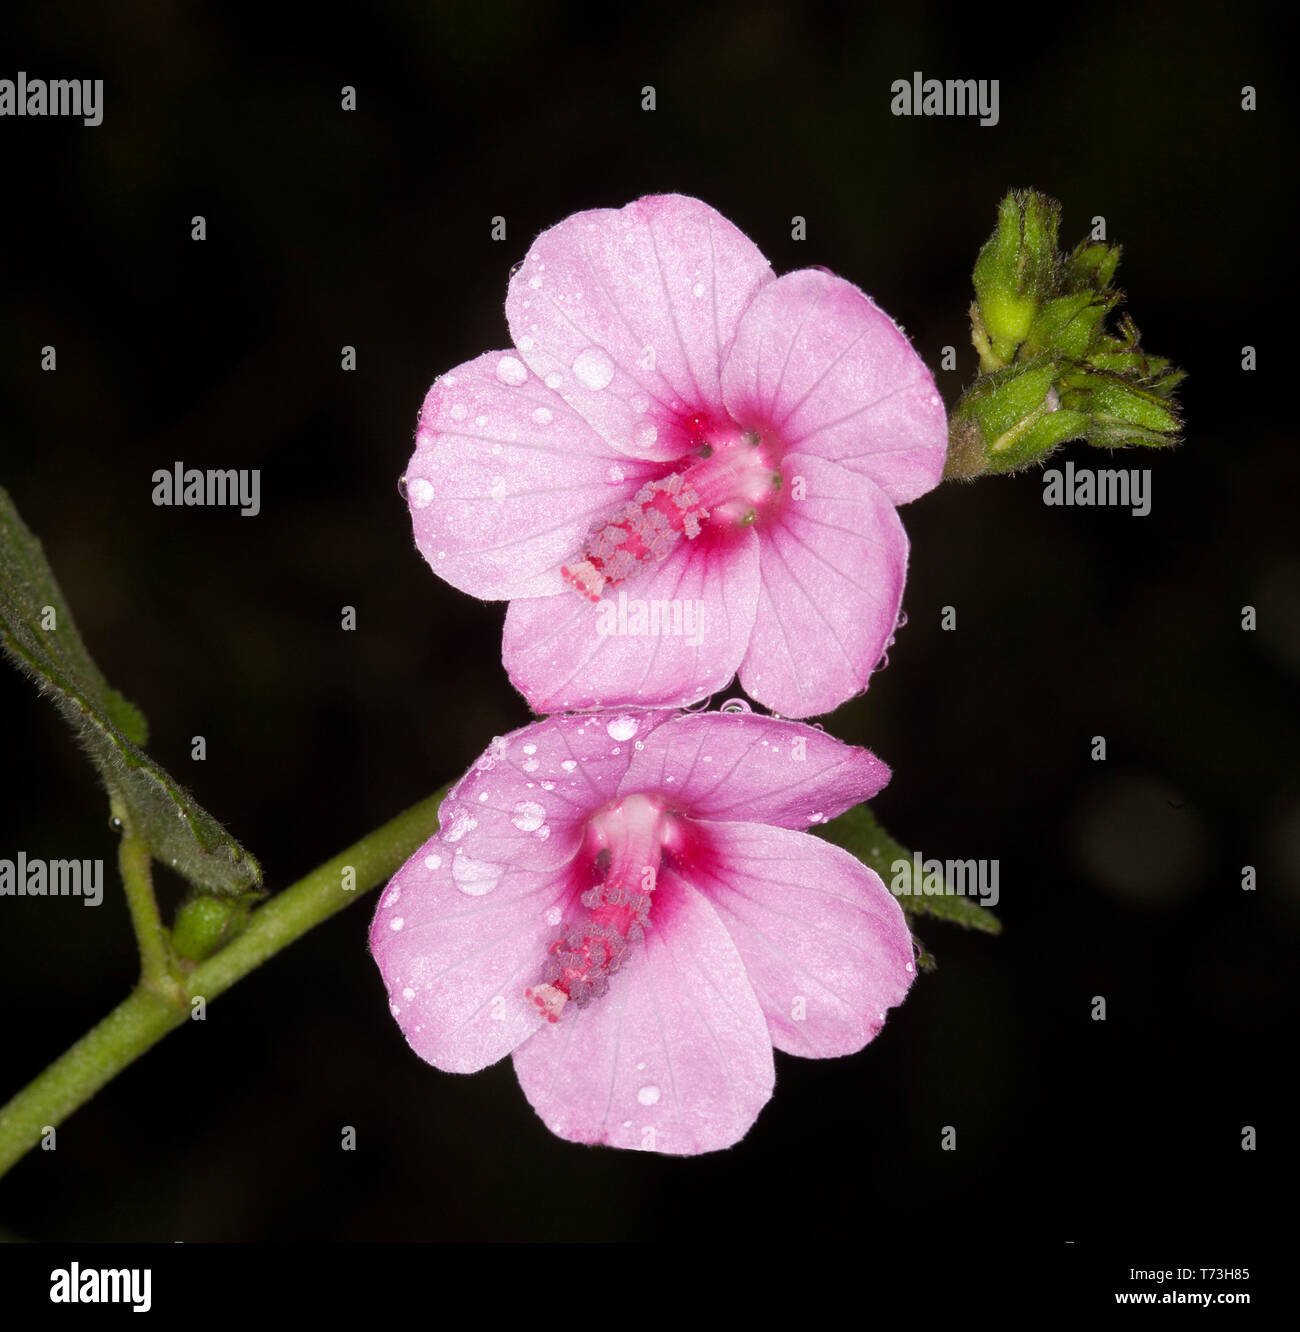 Stunning pink flowers of Australian wildflower Urena lobata, wild hibiscus, with raindrops on petals and green leaves against dark background Stock Photo